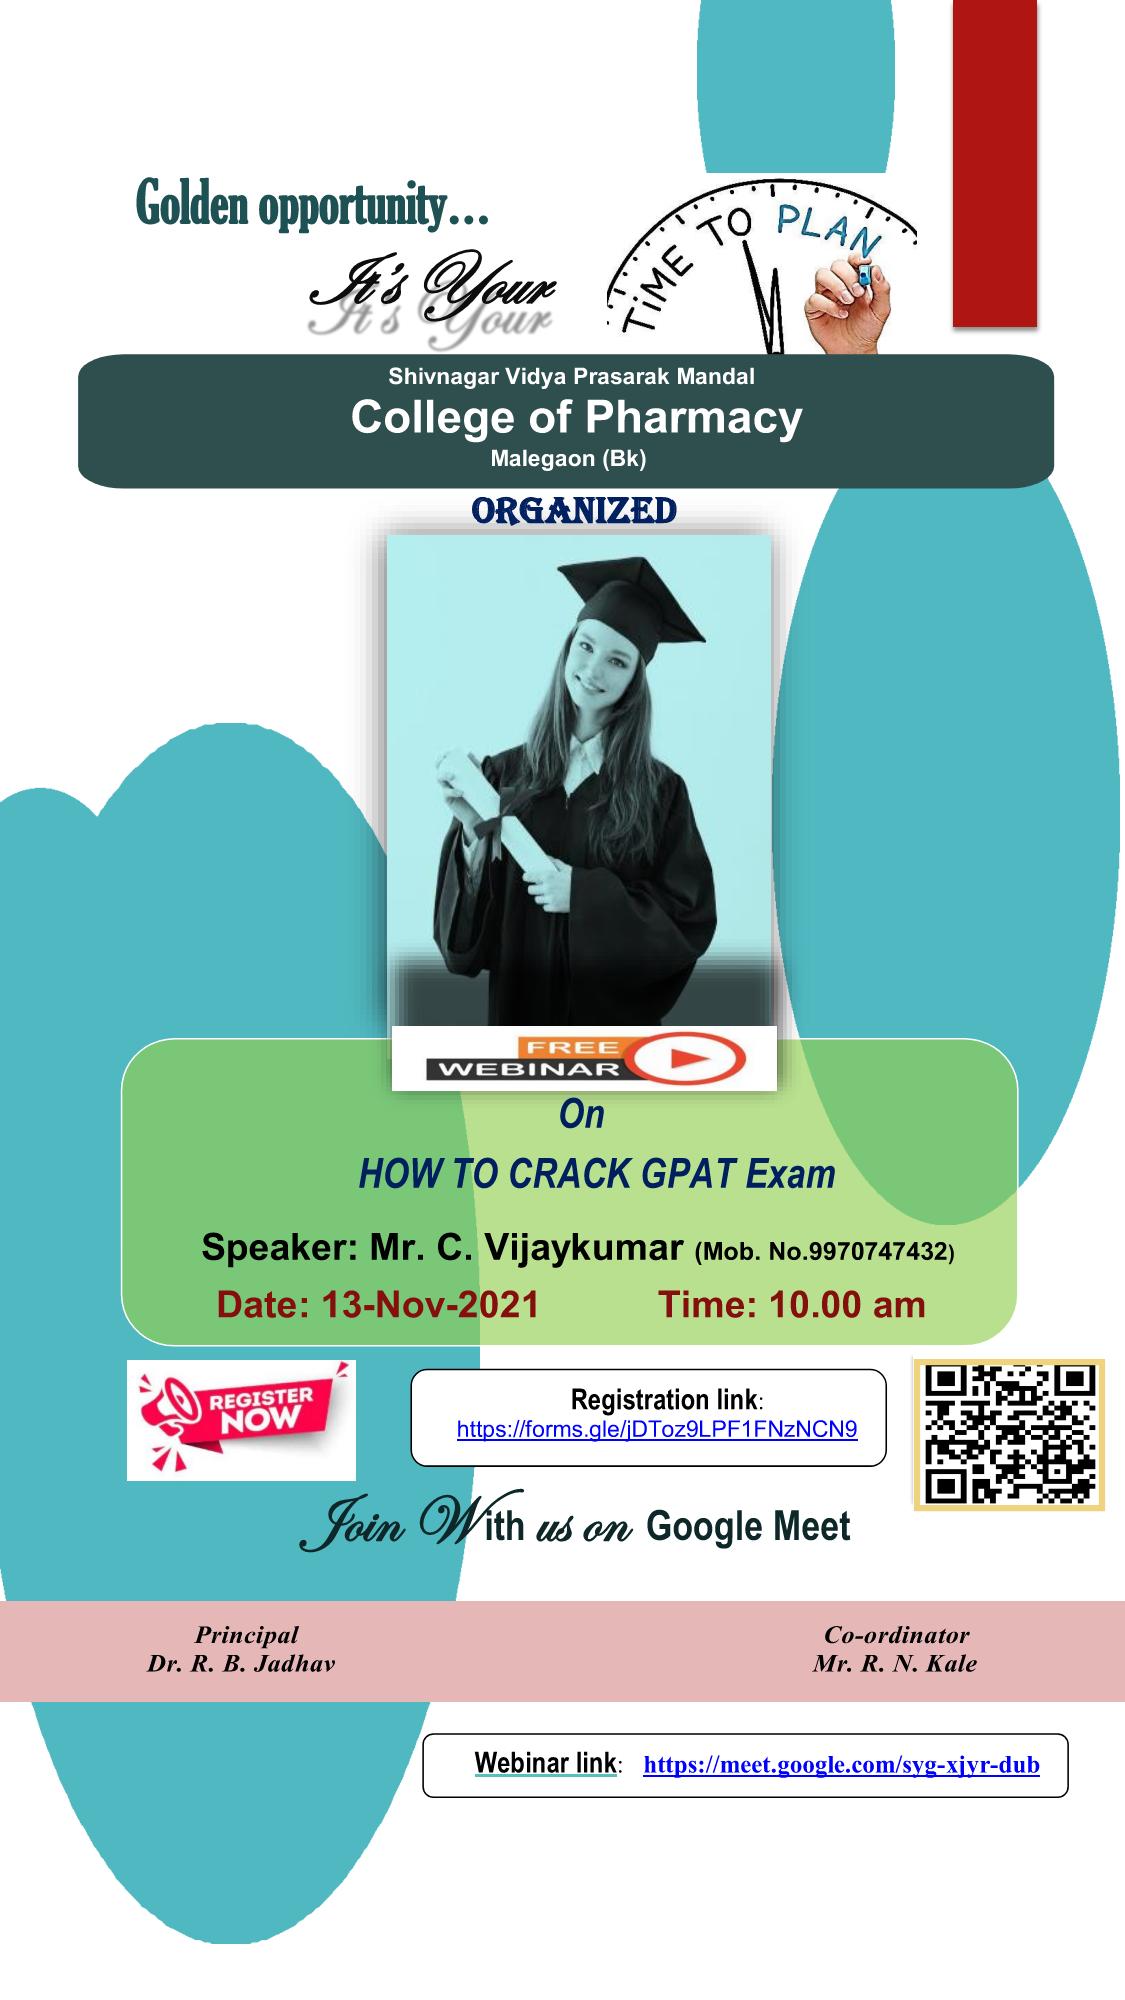 Free Webinar Event - How To Crack GPAT Examination, To Be Held On 13 11 2021